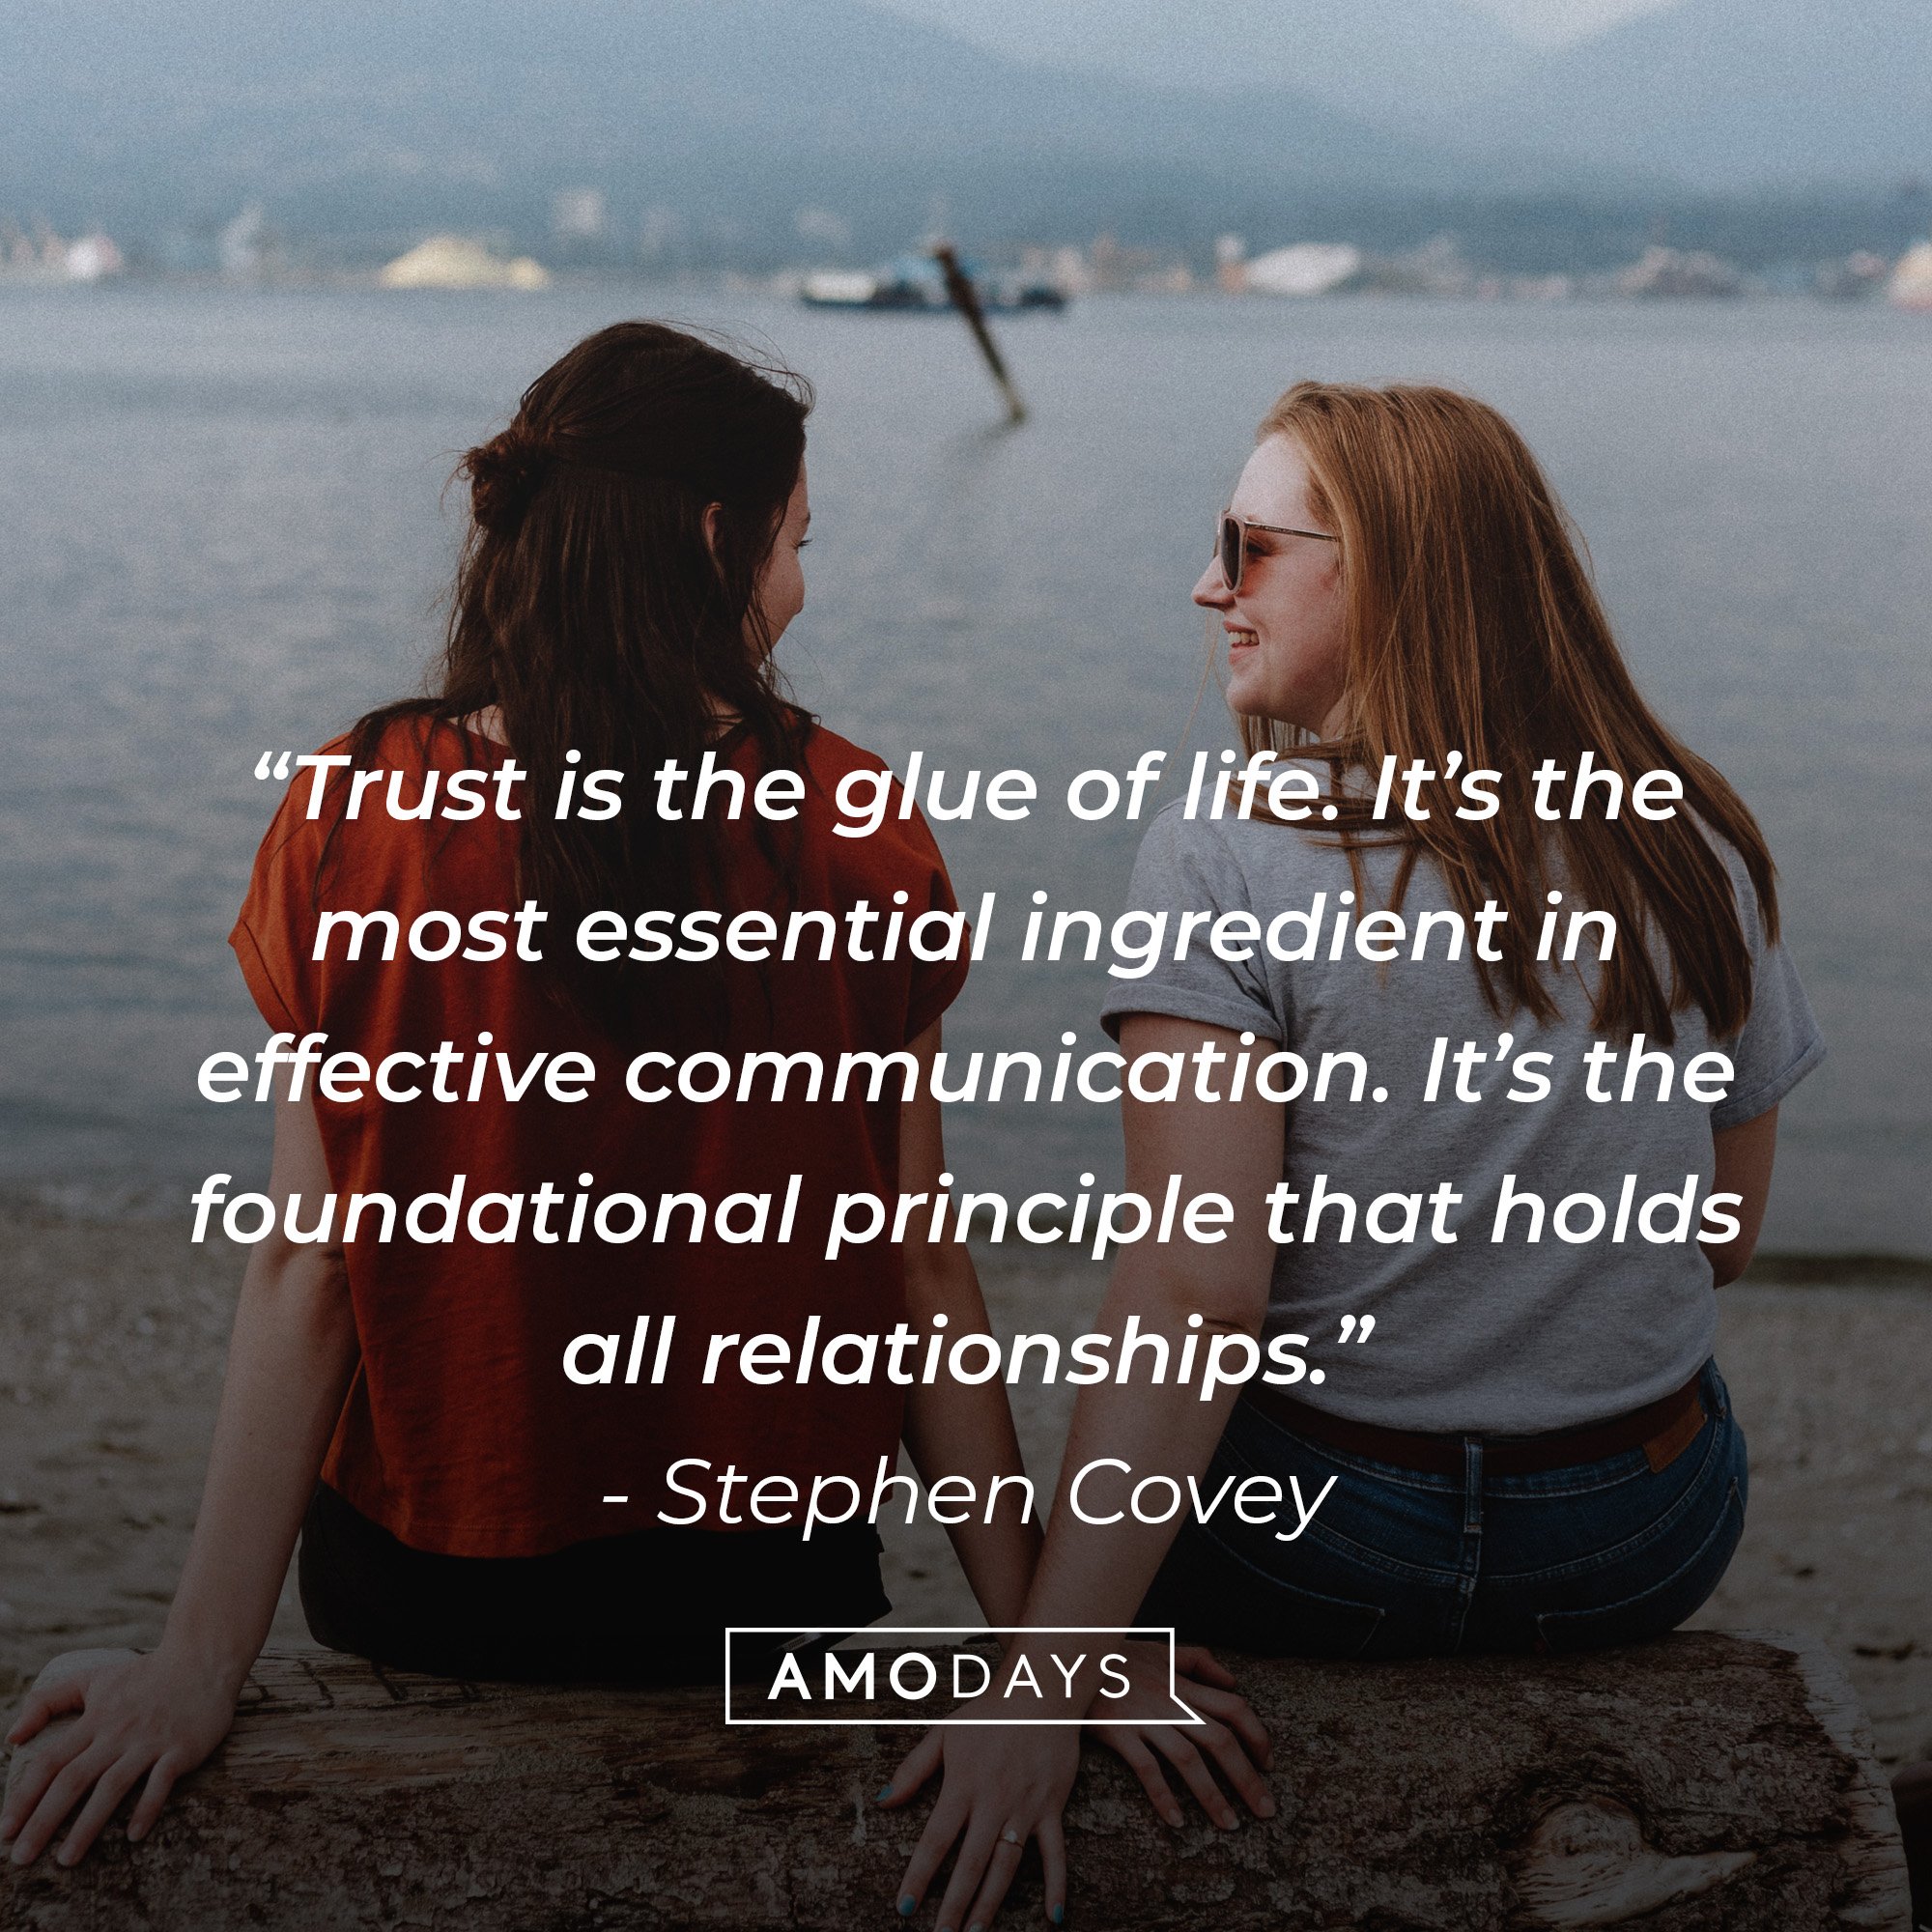 Stephen Covey’s quote: “Trust is the glue of life. It’s the most essential ingredient in effective communication. It’s the foundational principle that holds all relationships.” | Image: AmoDays